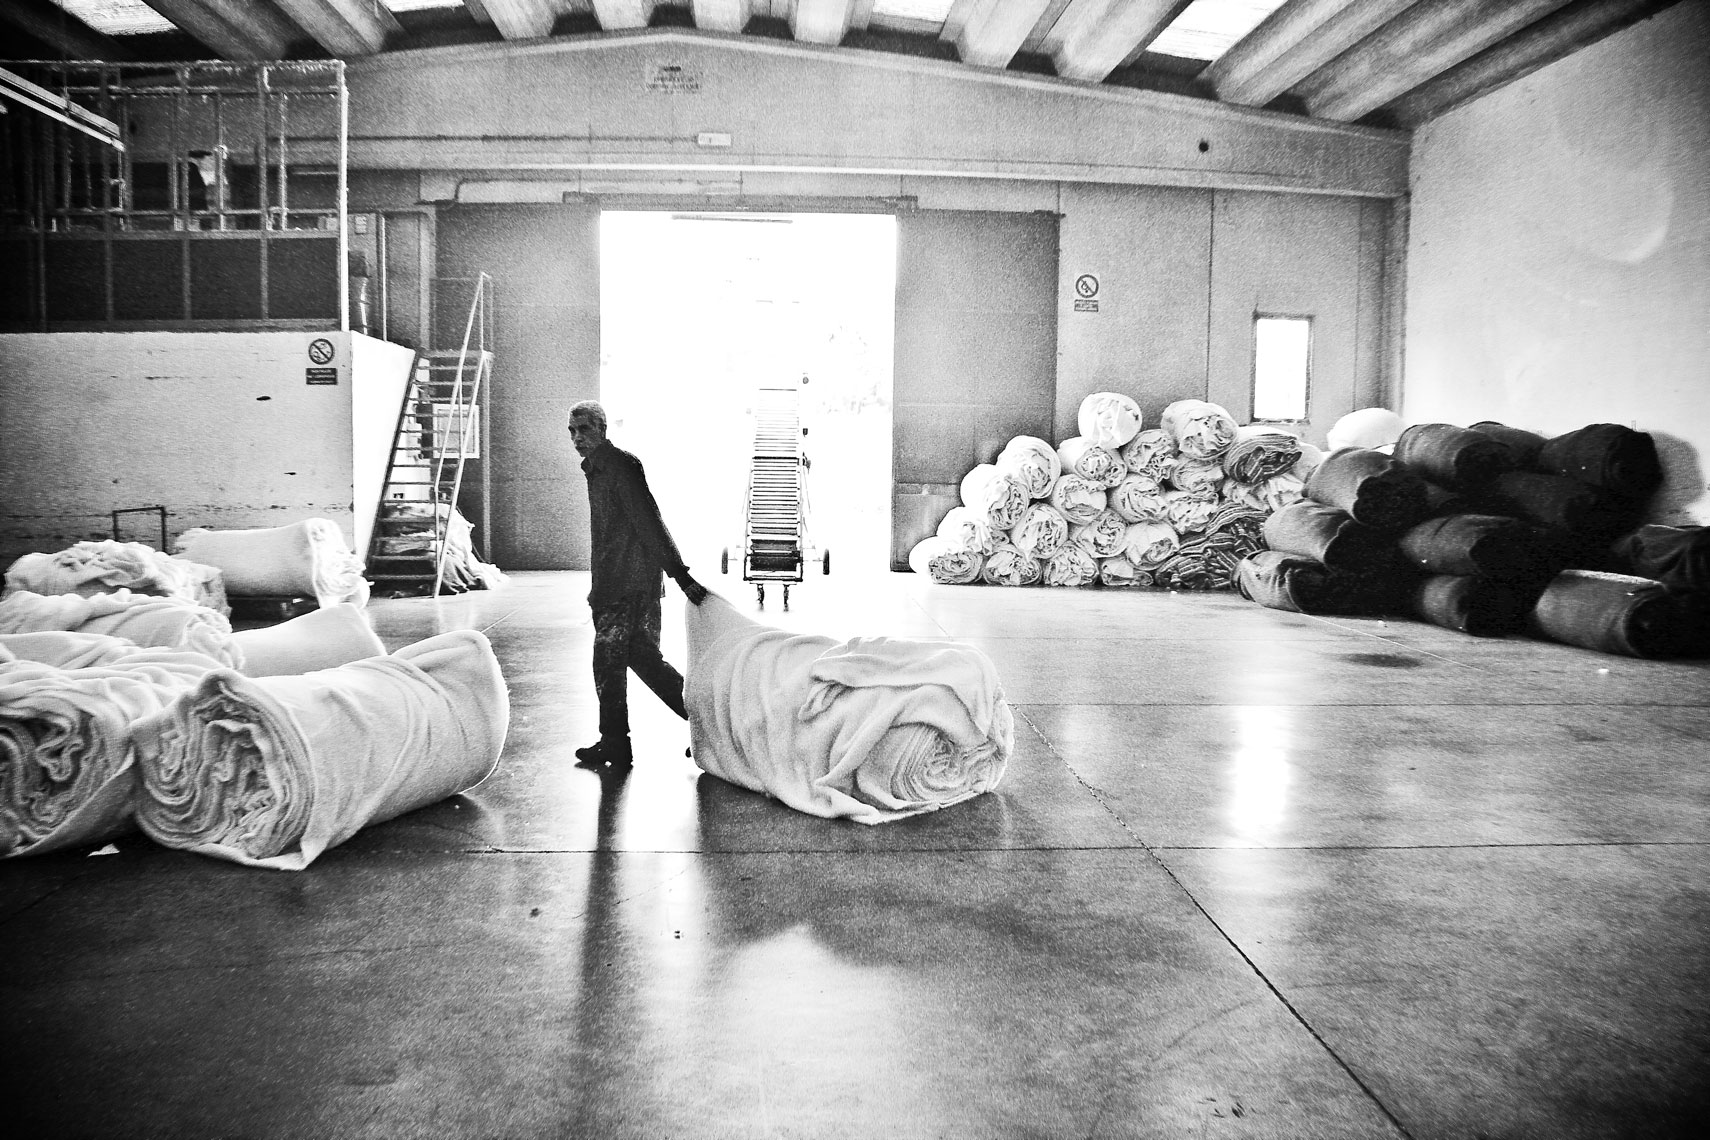 ITALY. Poggio a Caiano (Prato), 1st April 2009. Workers takes out wool shreds from washing machines.